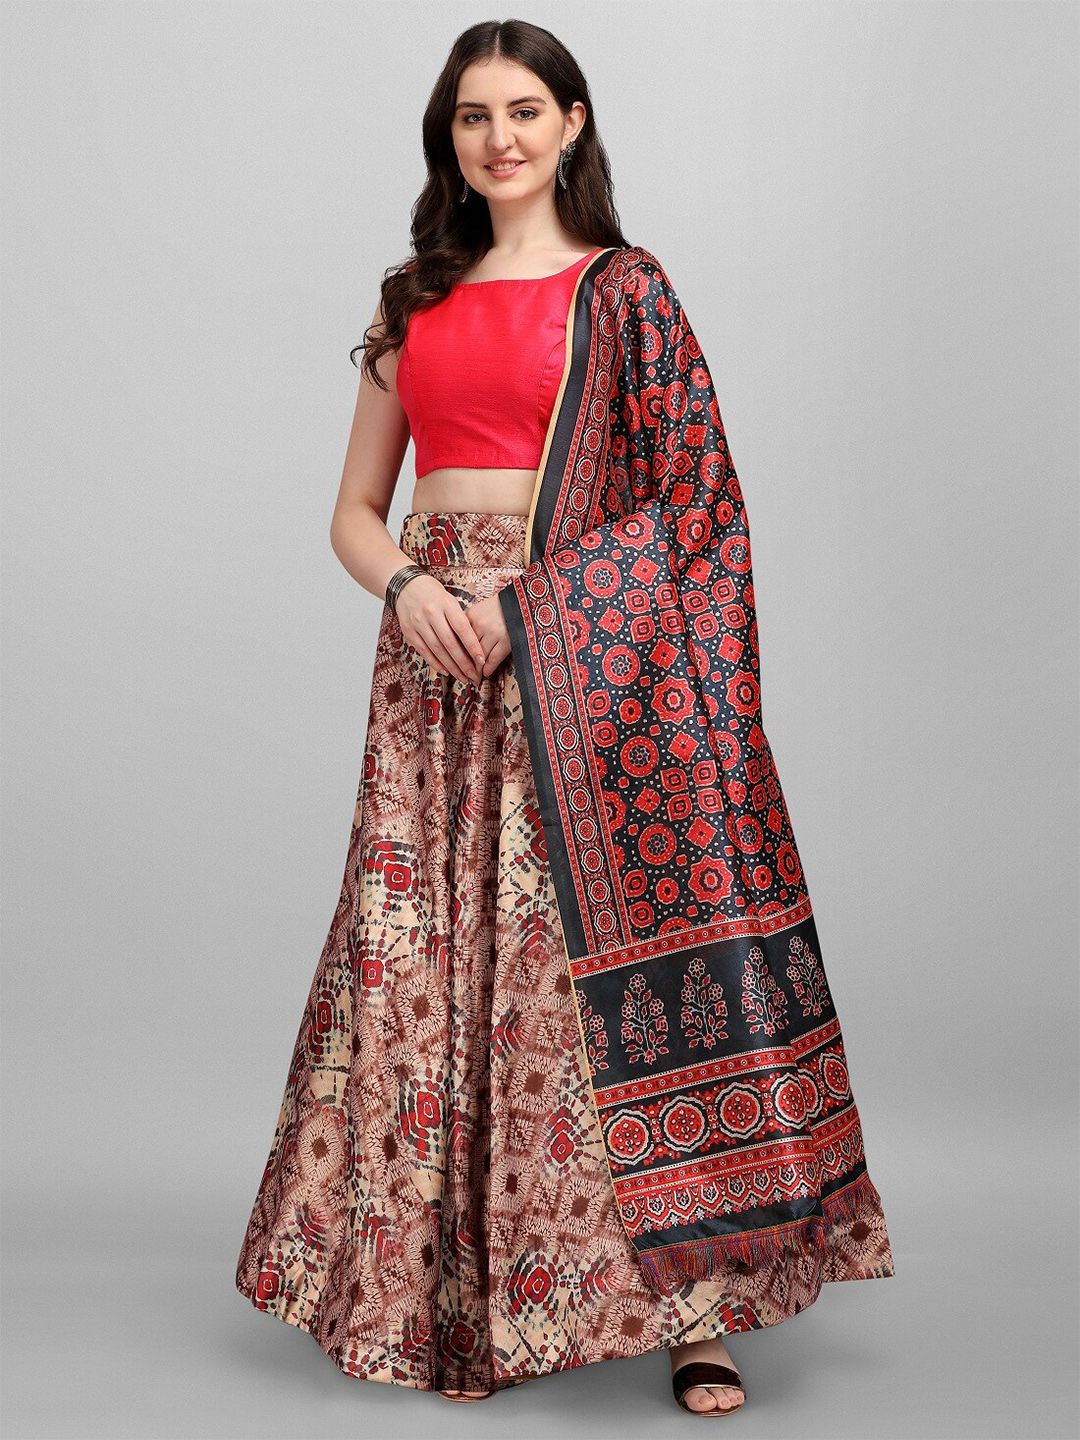 Fashion Basket Beige & Red Semi-Stitched Lehenga & Unstitched Blouse With Dupatta Price in India